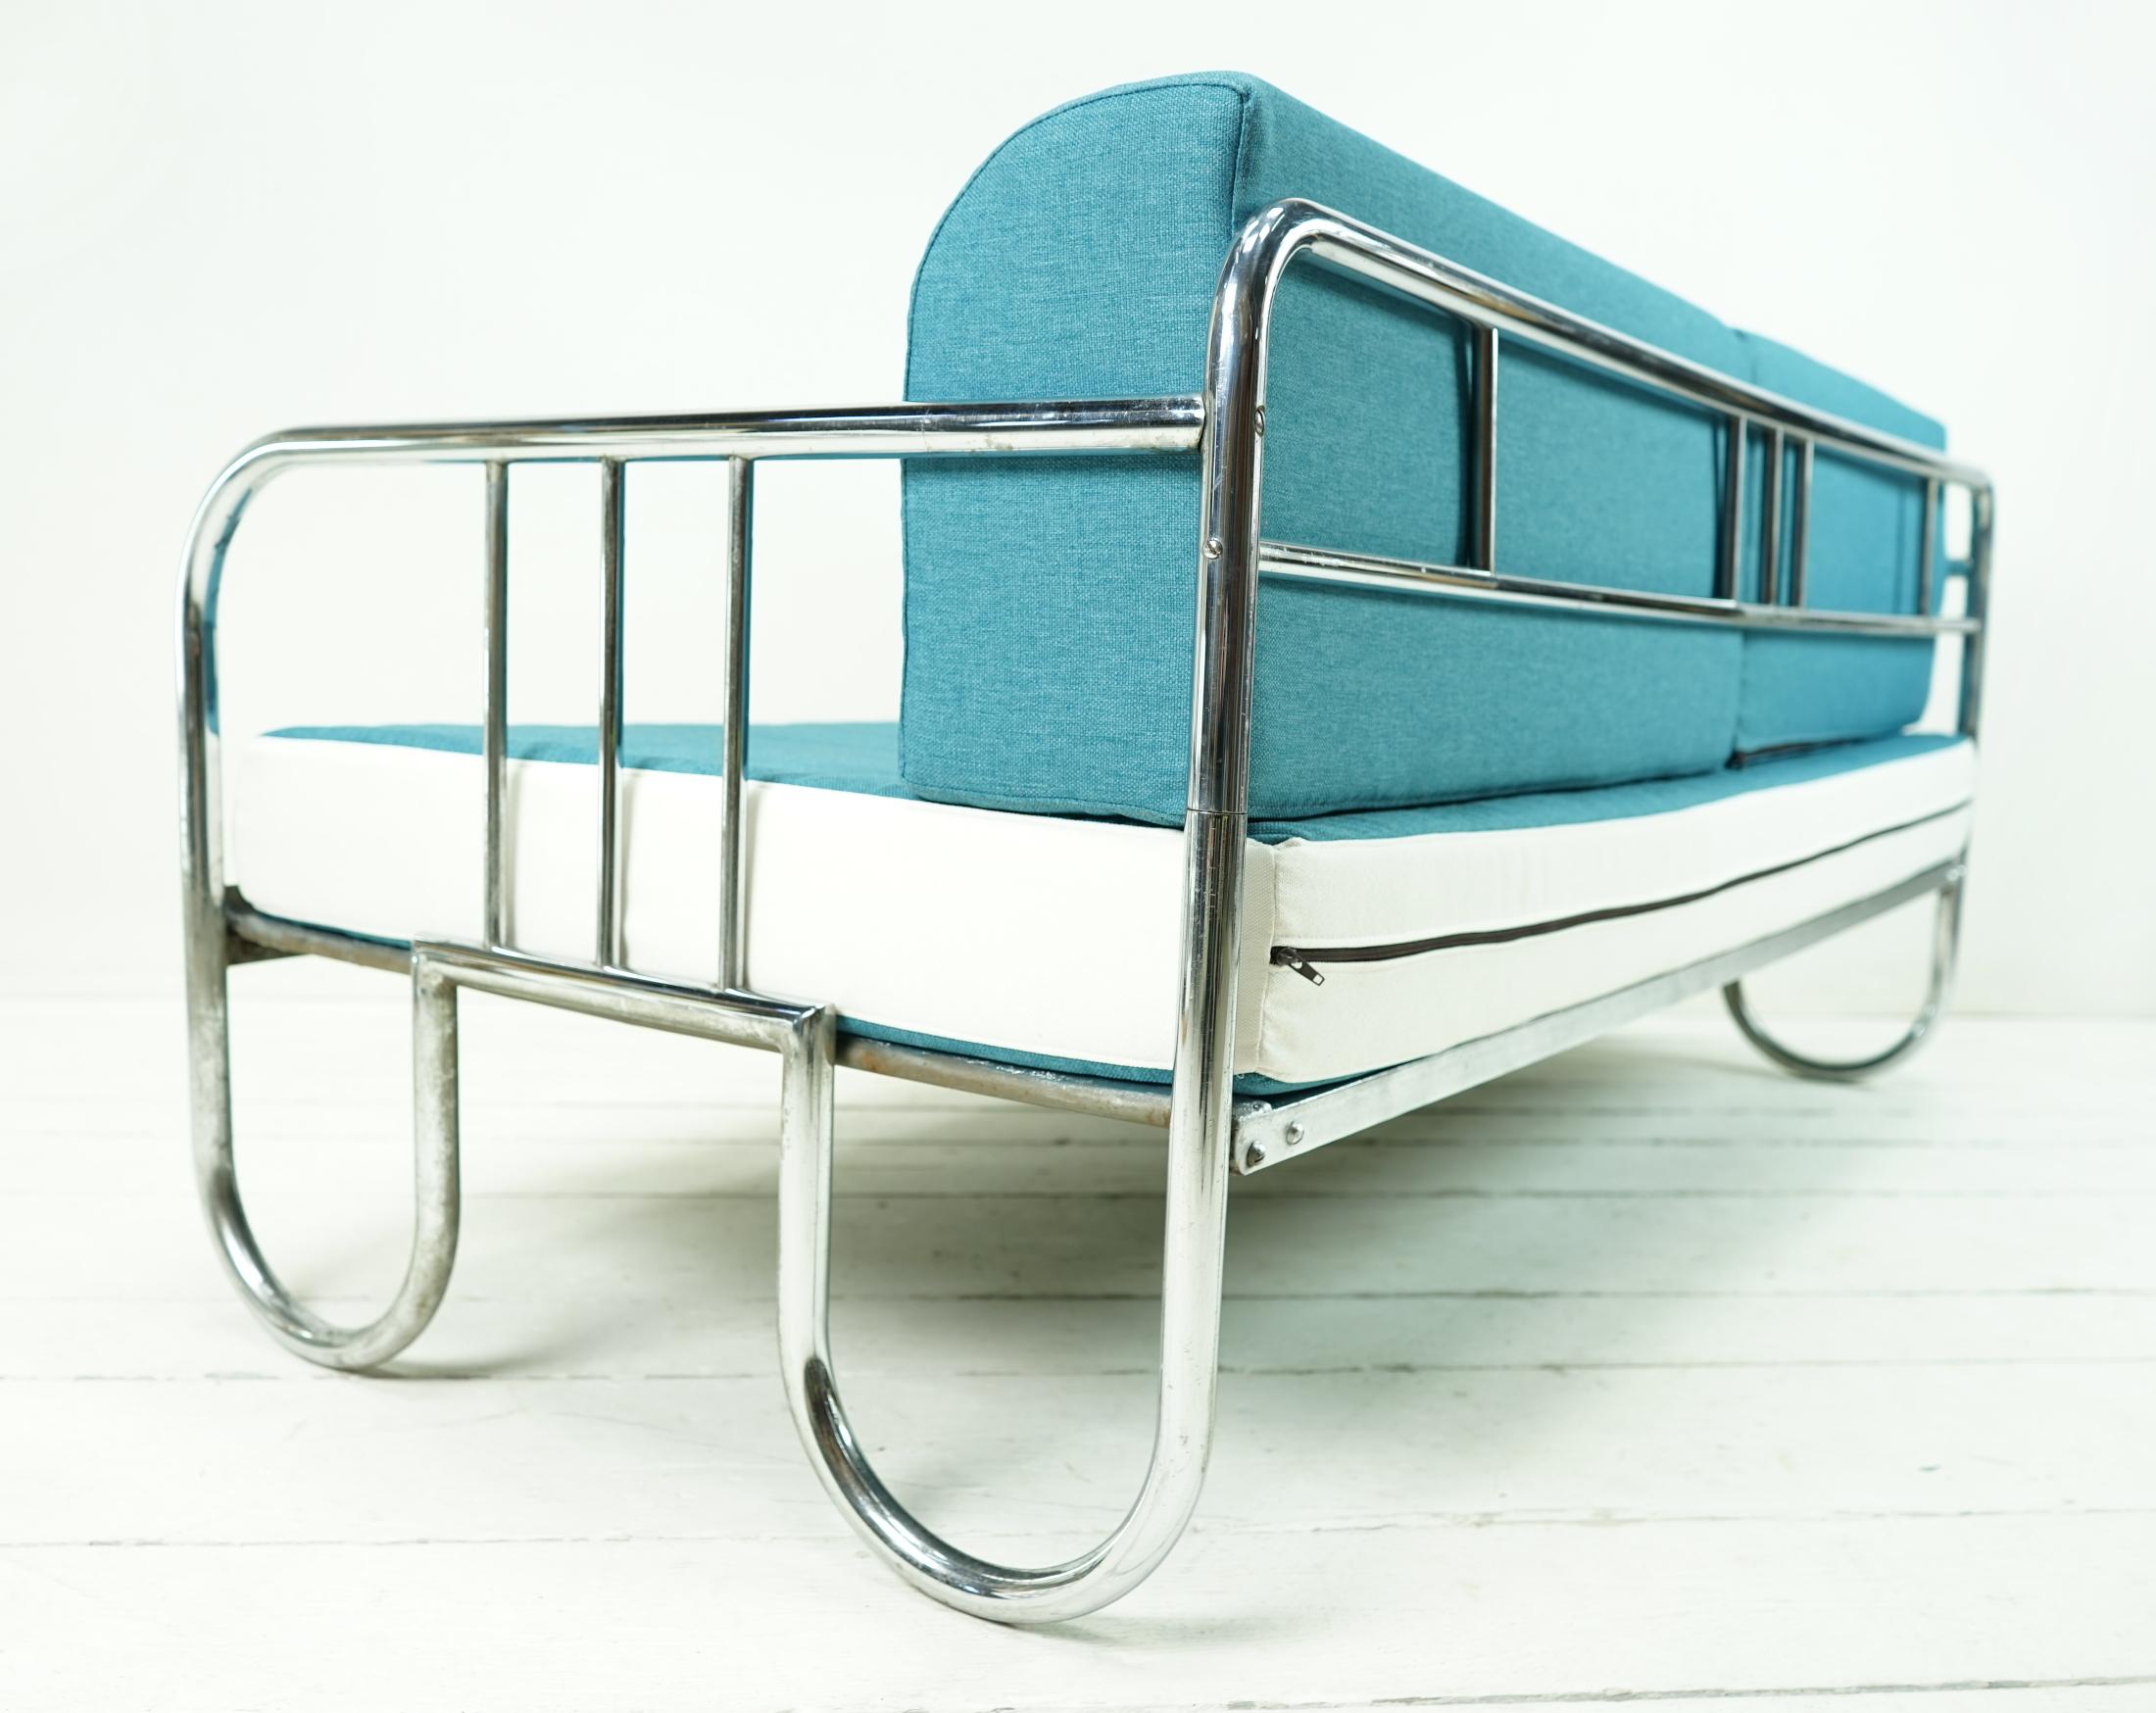 Galvanized Bauhaus Sofa Vintage Day Bed with Loop Feet from the 1930s with Designer Fabric For Sale